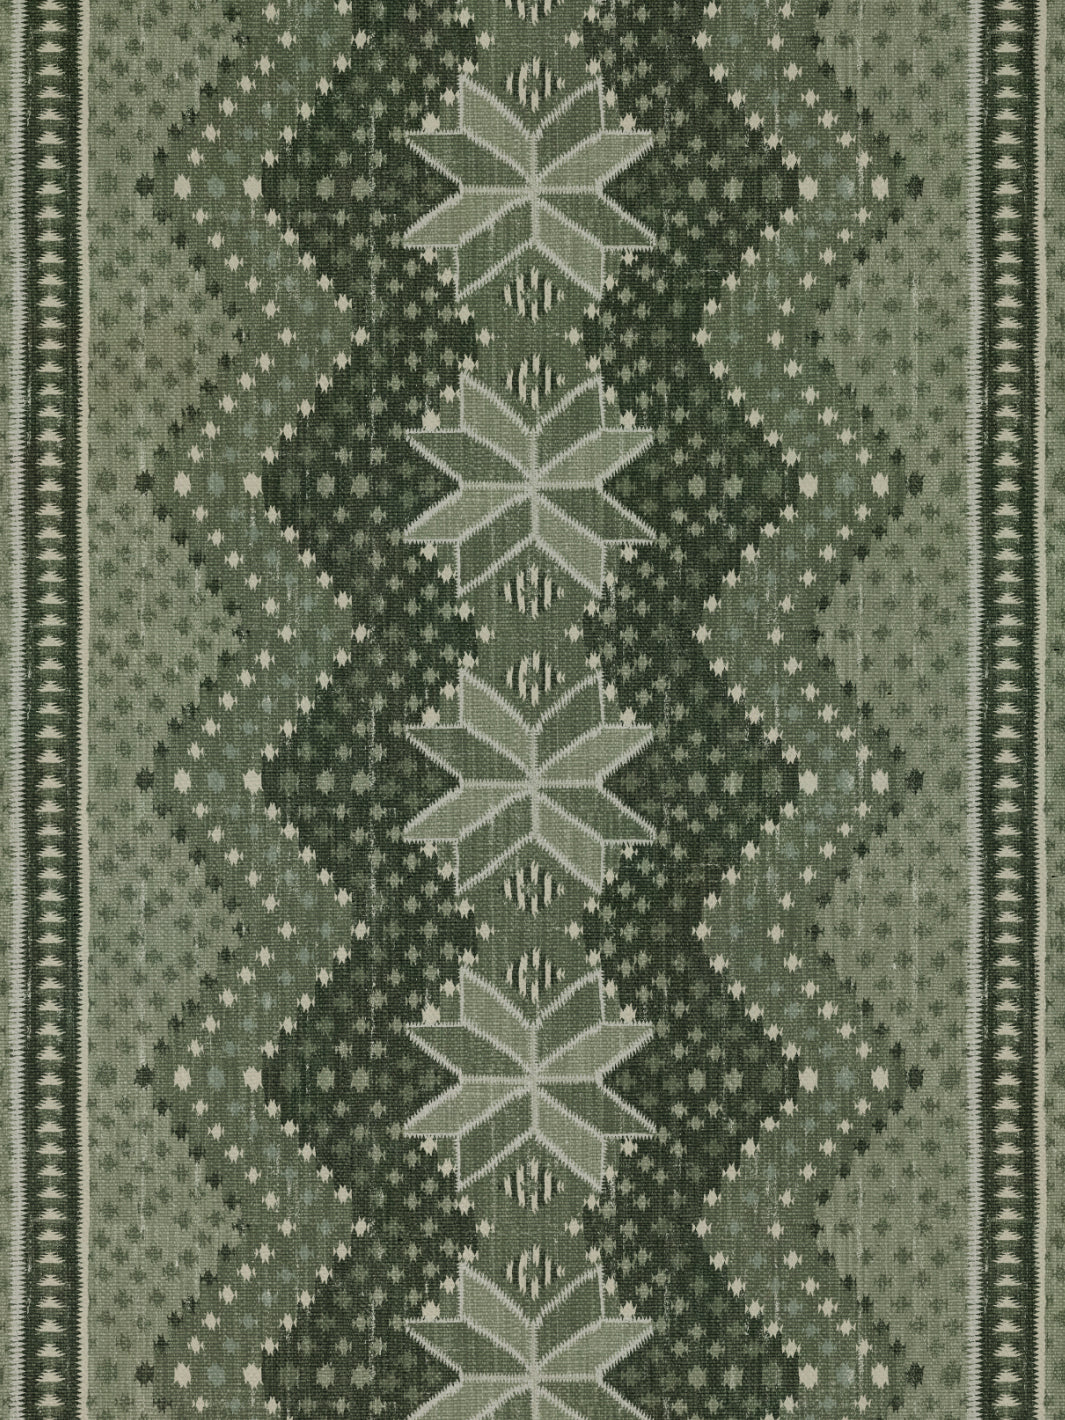 'Northstar Blanket' Linen Fabric by Nathan Turner - Green